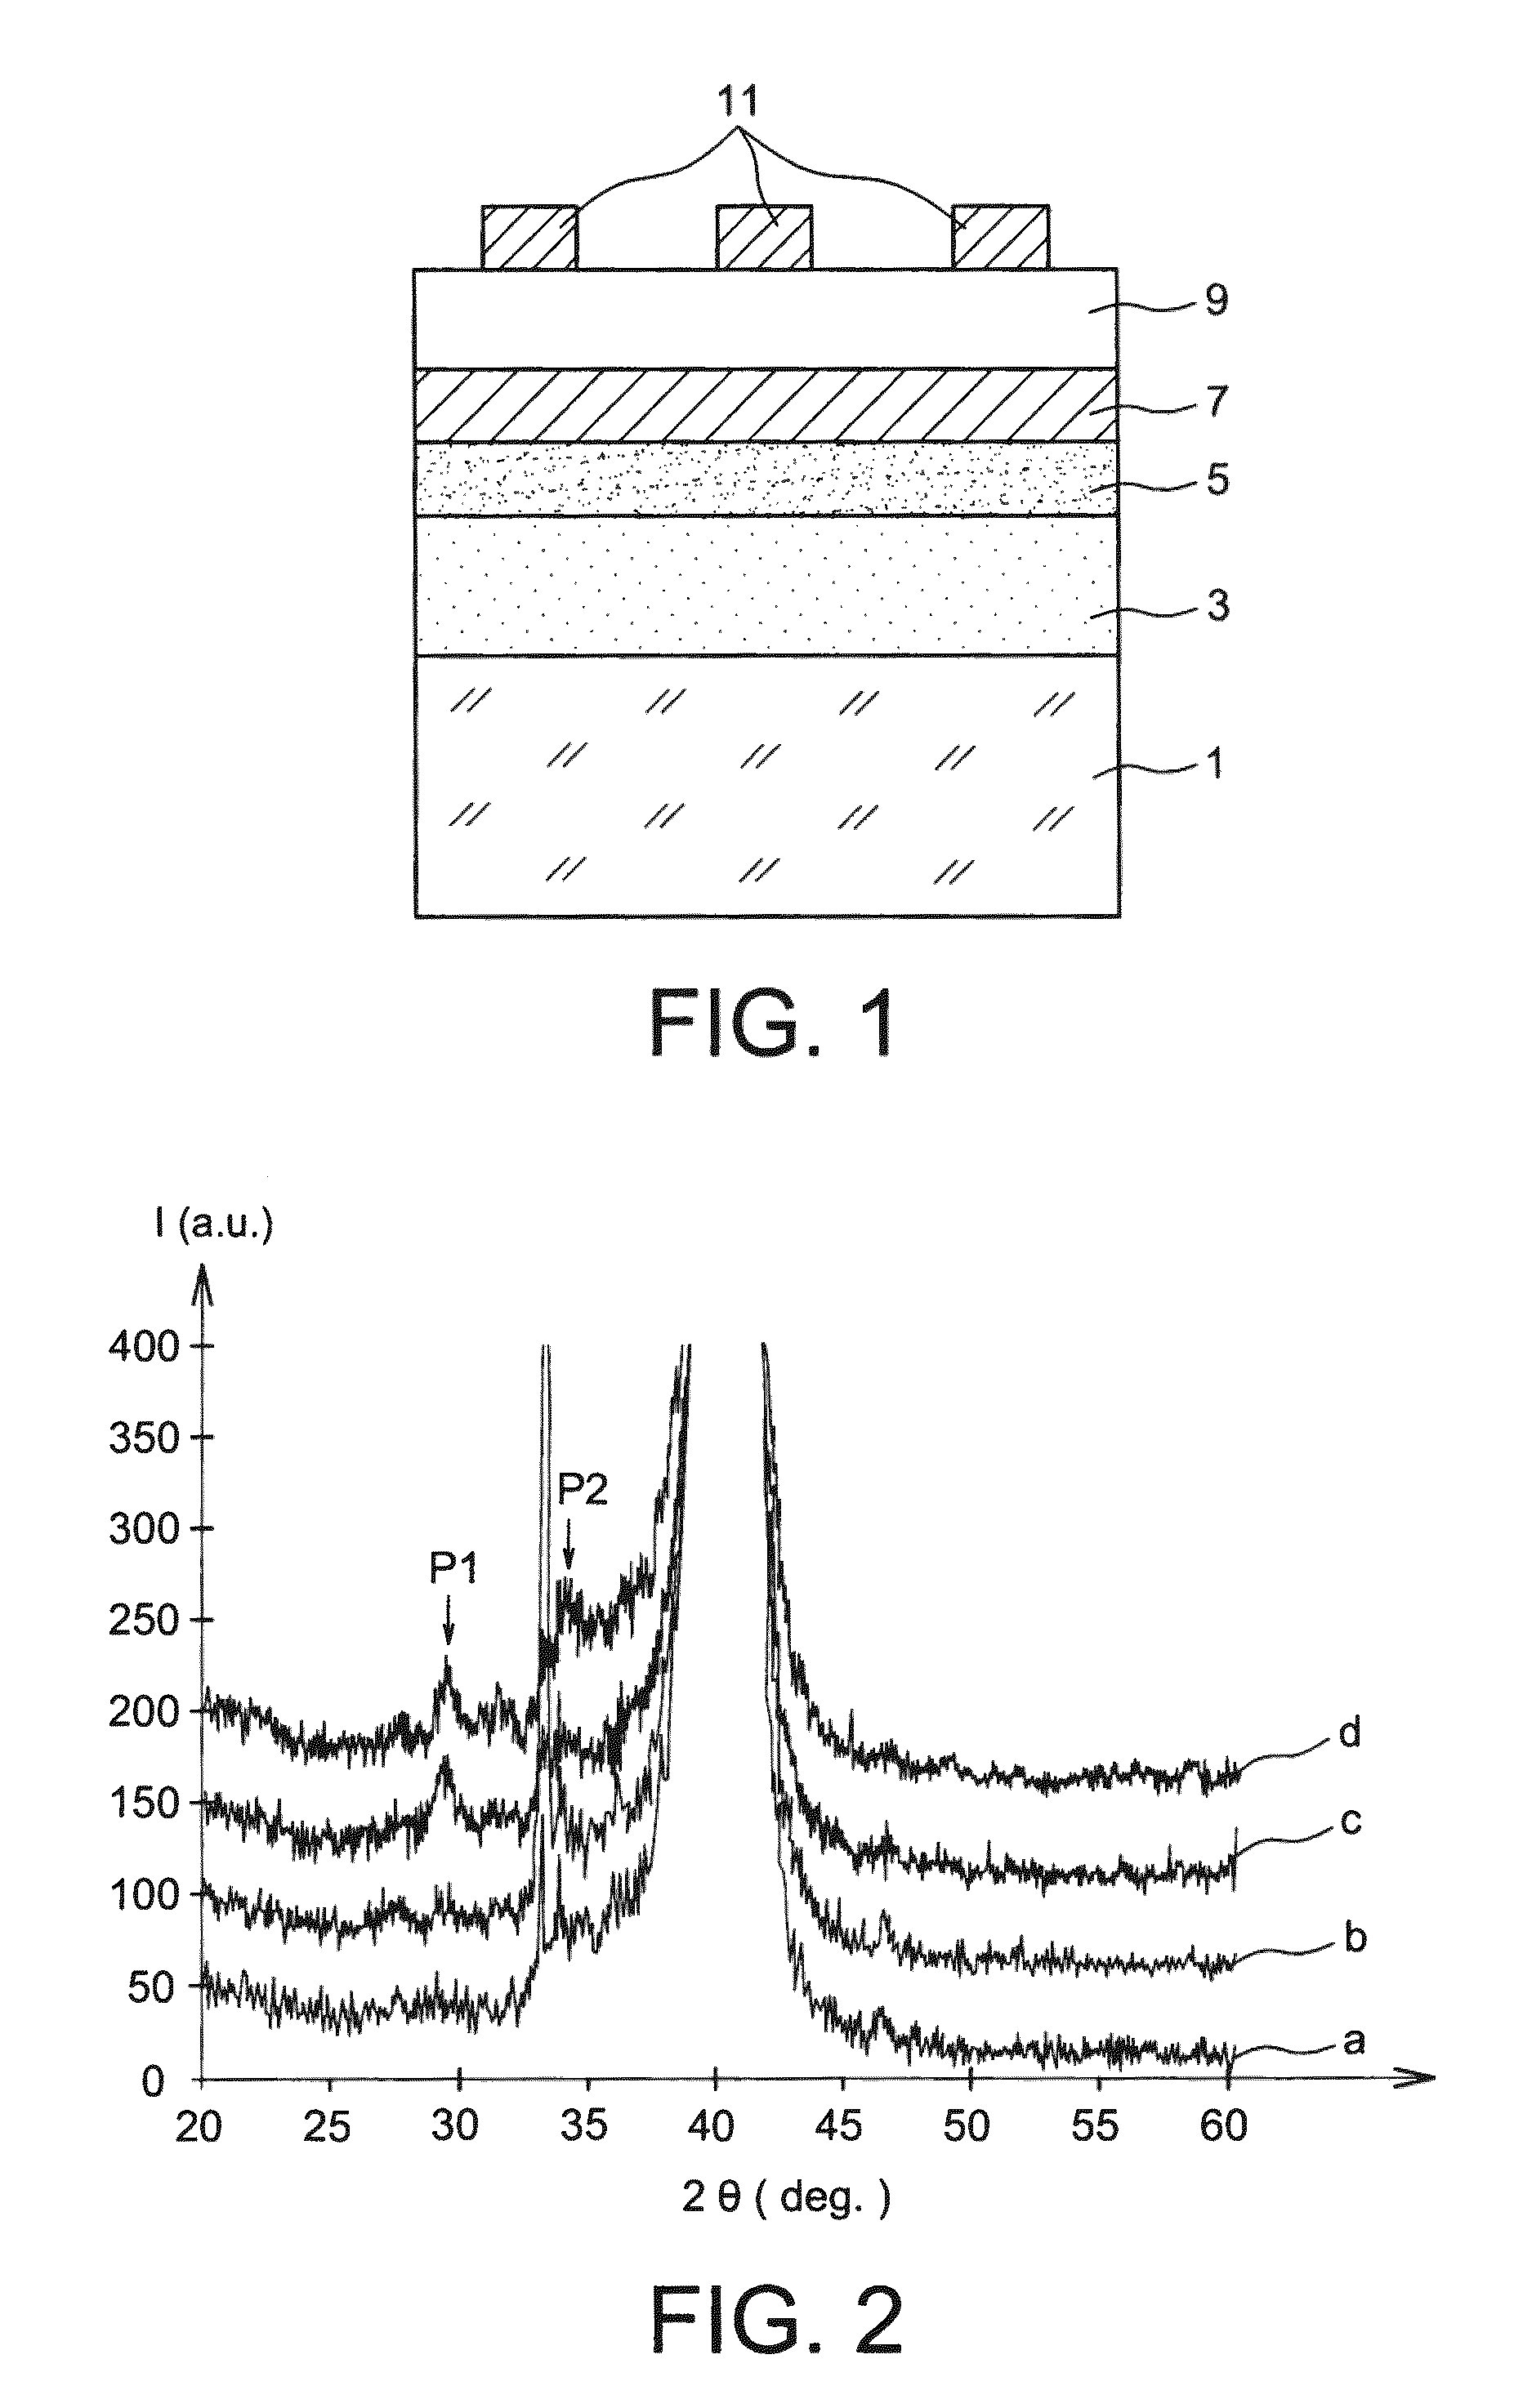 Process for forming a ceramic oxide material with a pyrochlore structure having a high dielectric constant and implementation of this process for applications in microelectronics